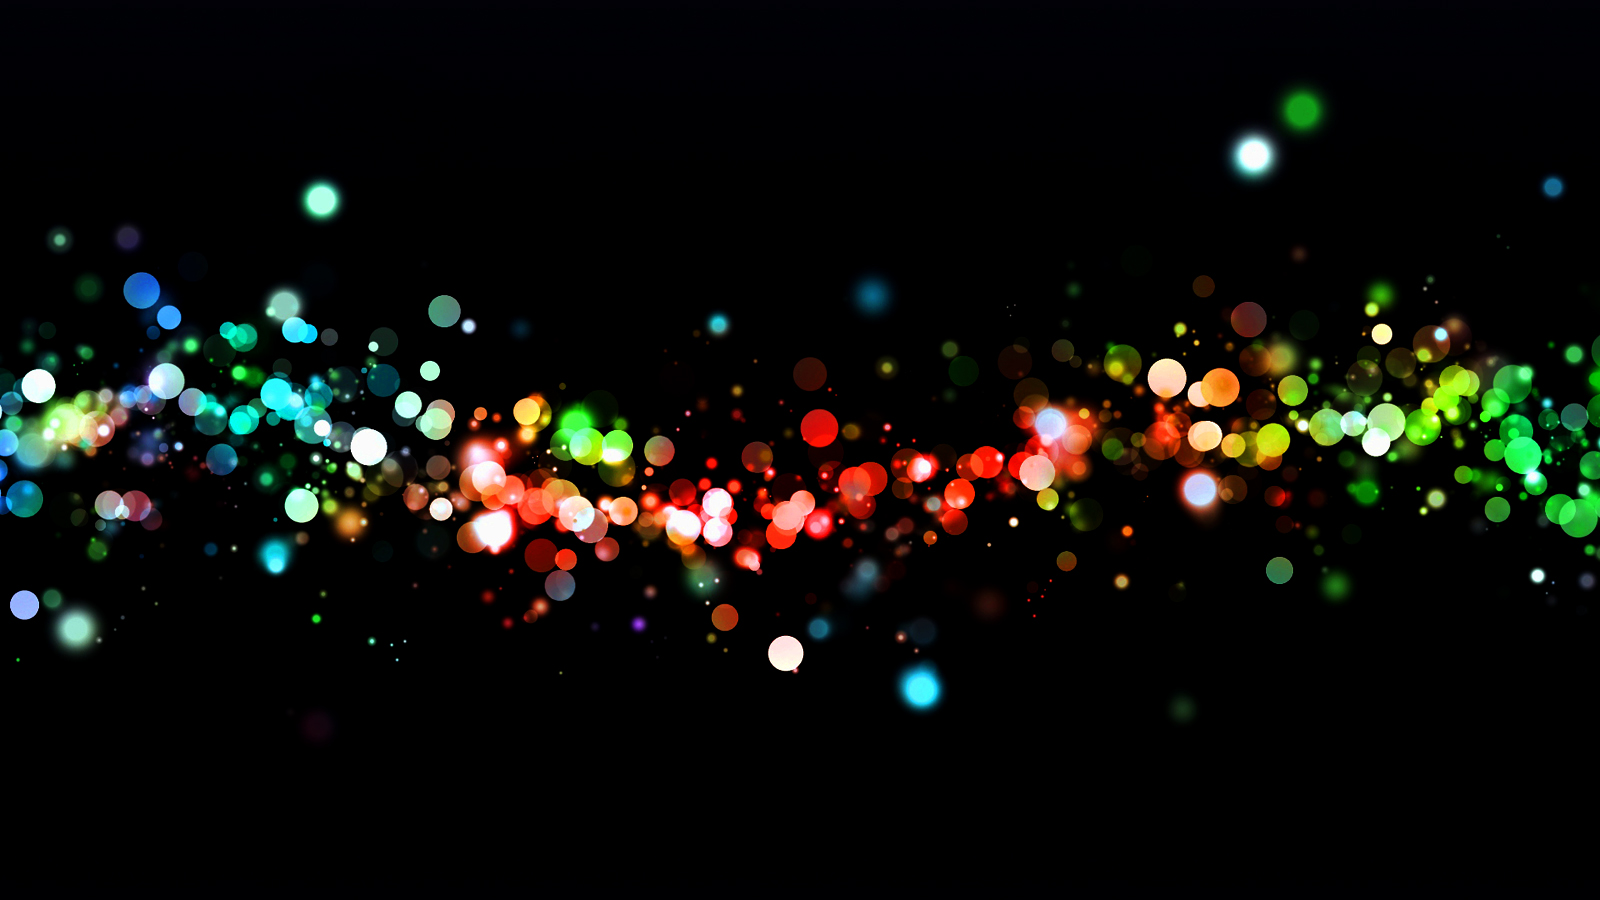 Abstract Light Circles Bokeh HD Wallpapers Download Free Wallpapers in